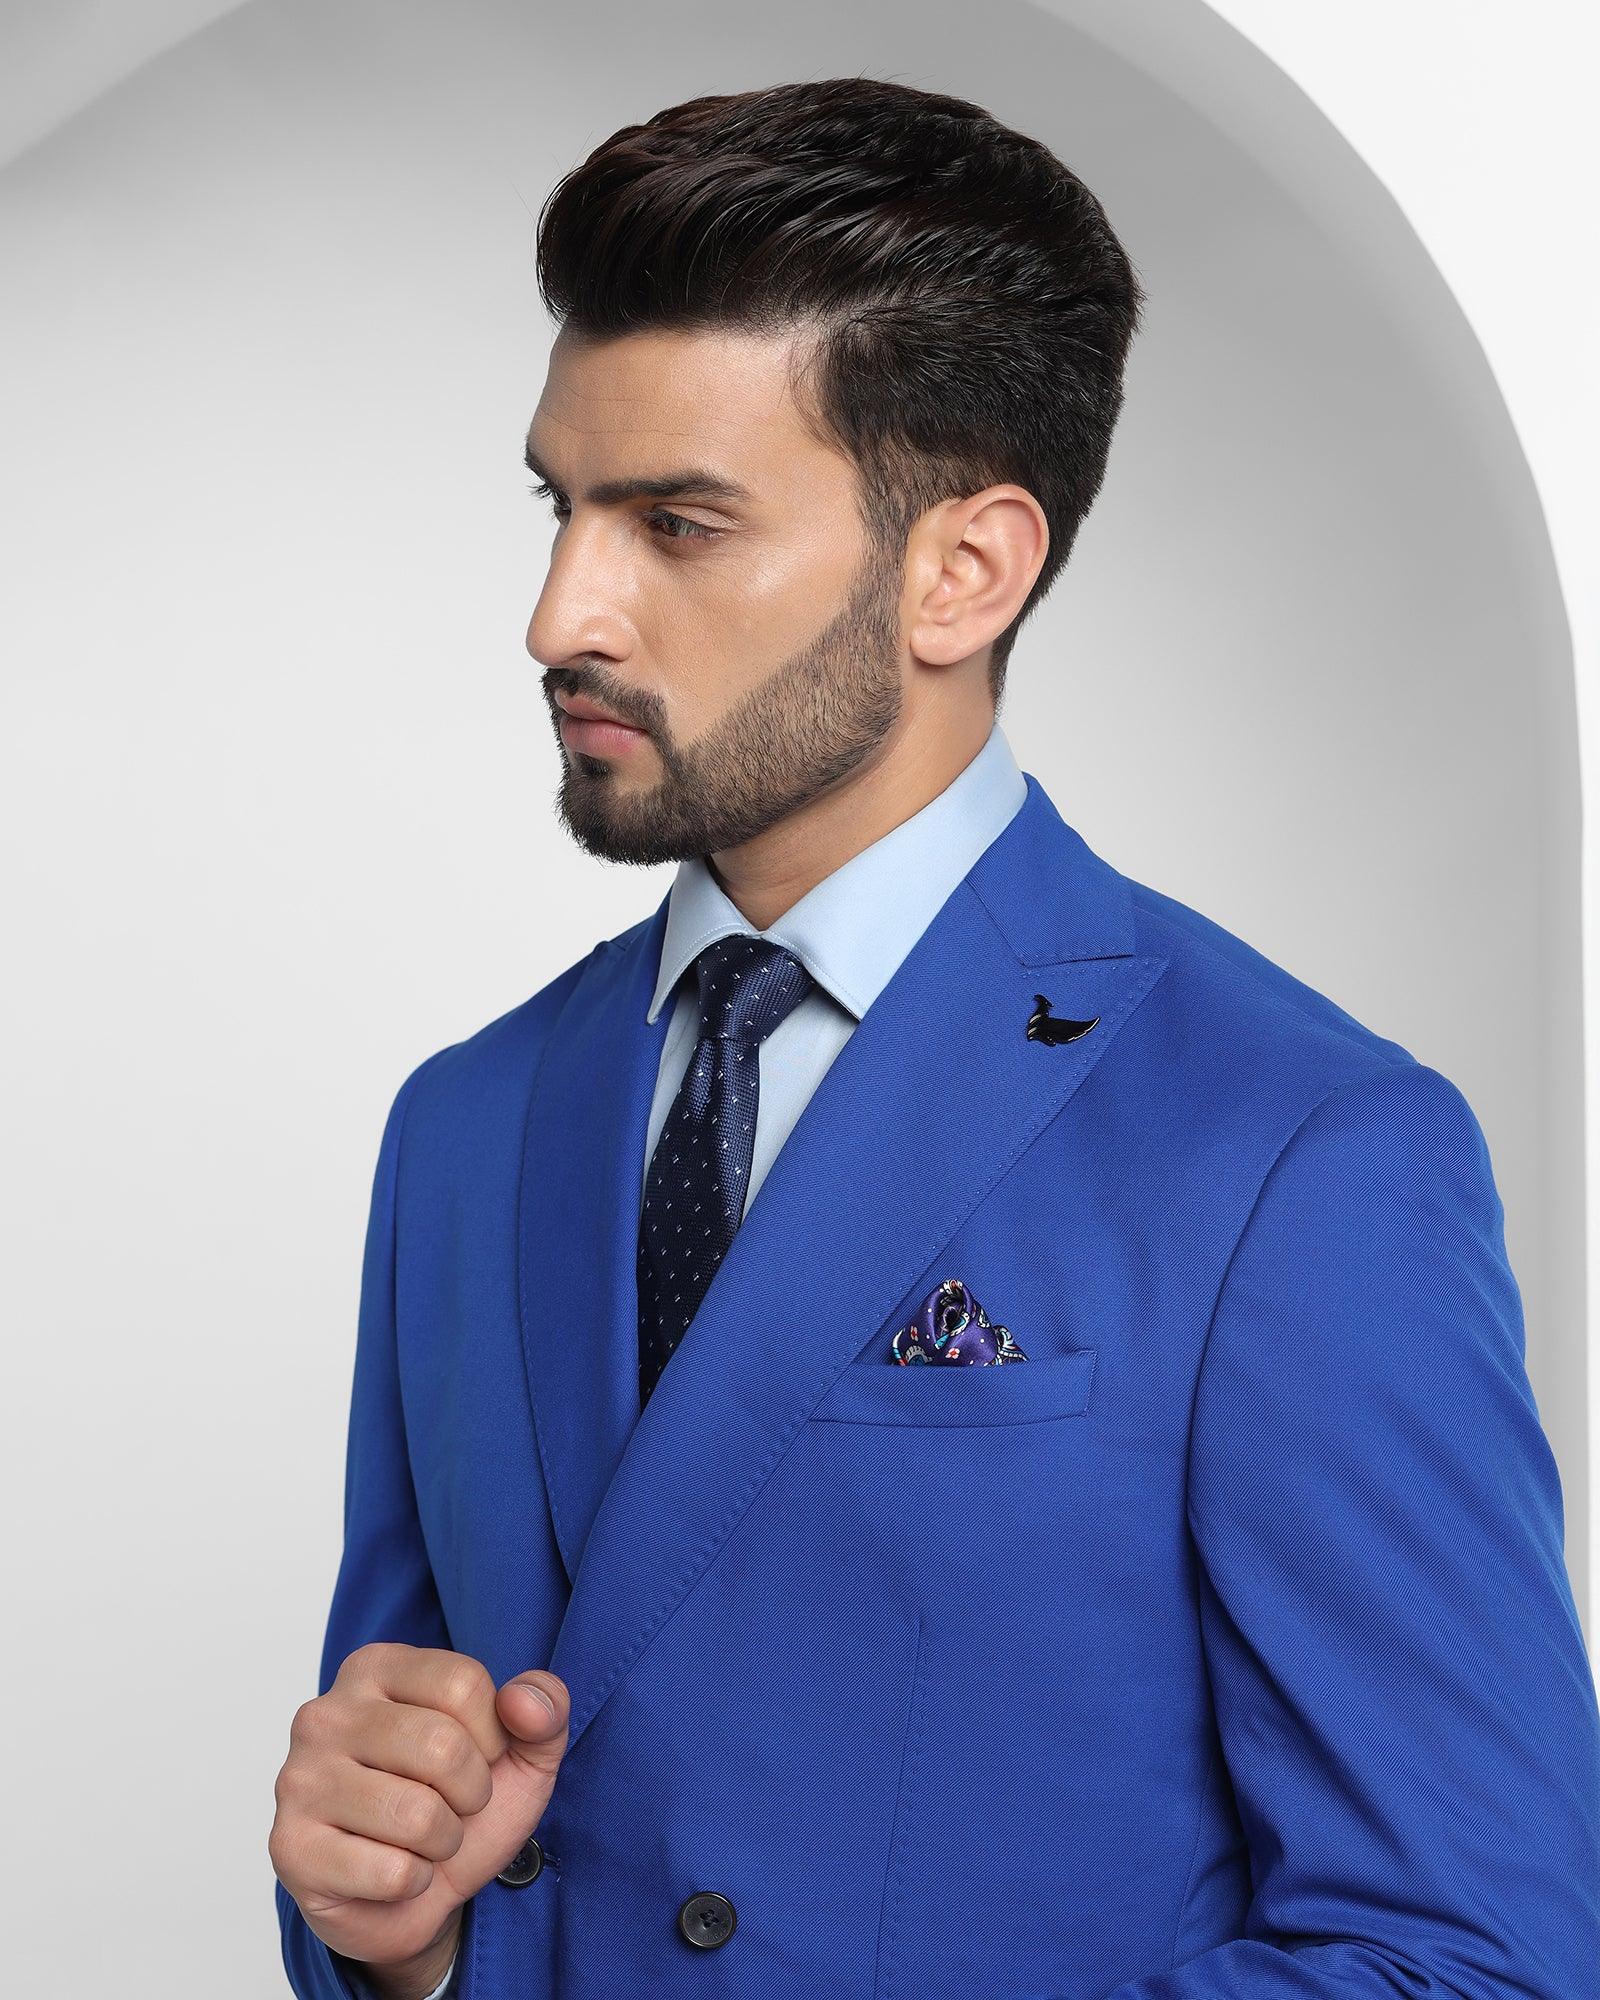 Double Breasted Two Piece Royal Blue Solid Formal Suit - Elmund